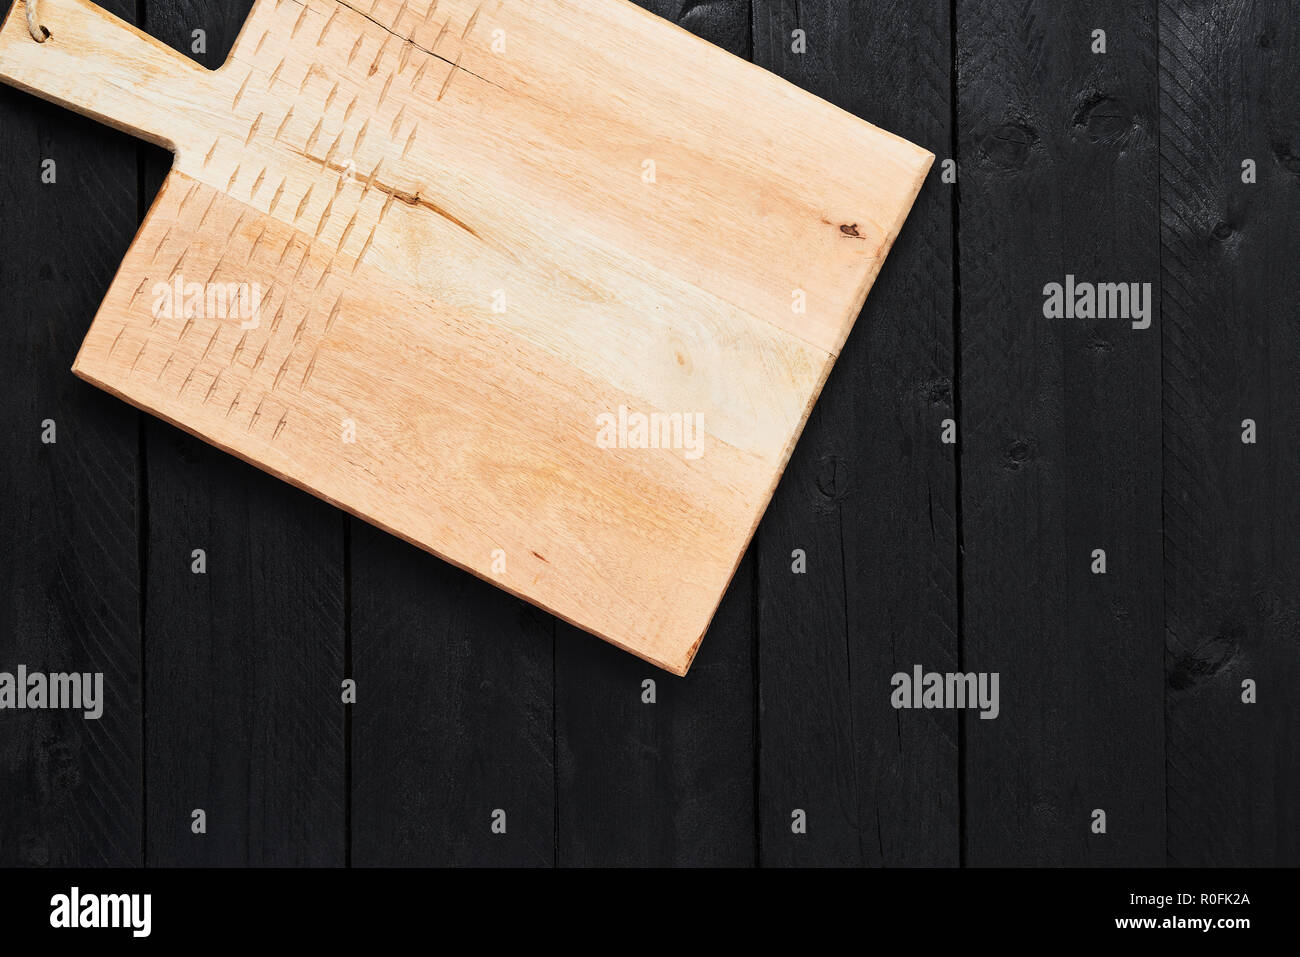 Top view of new handmade chopping board on black wooden table with copy space. Stock Photo